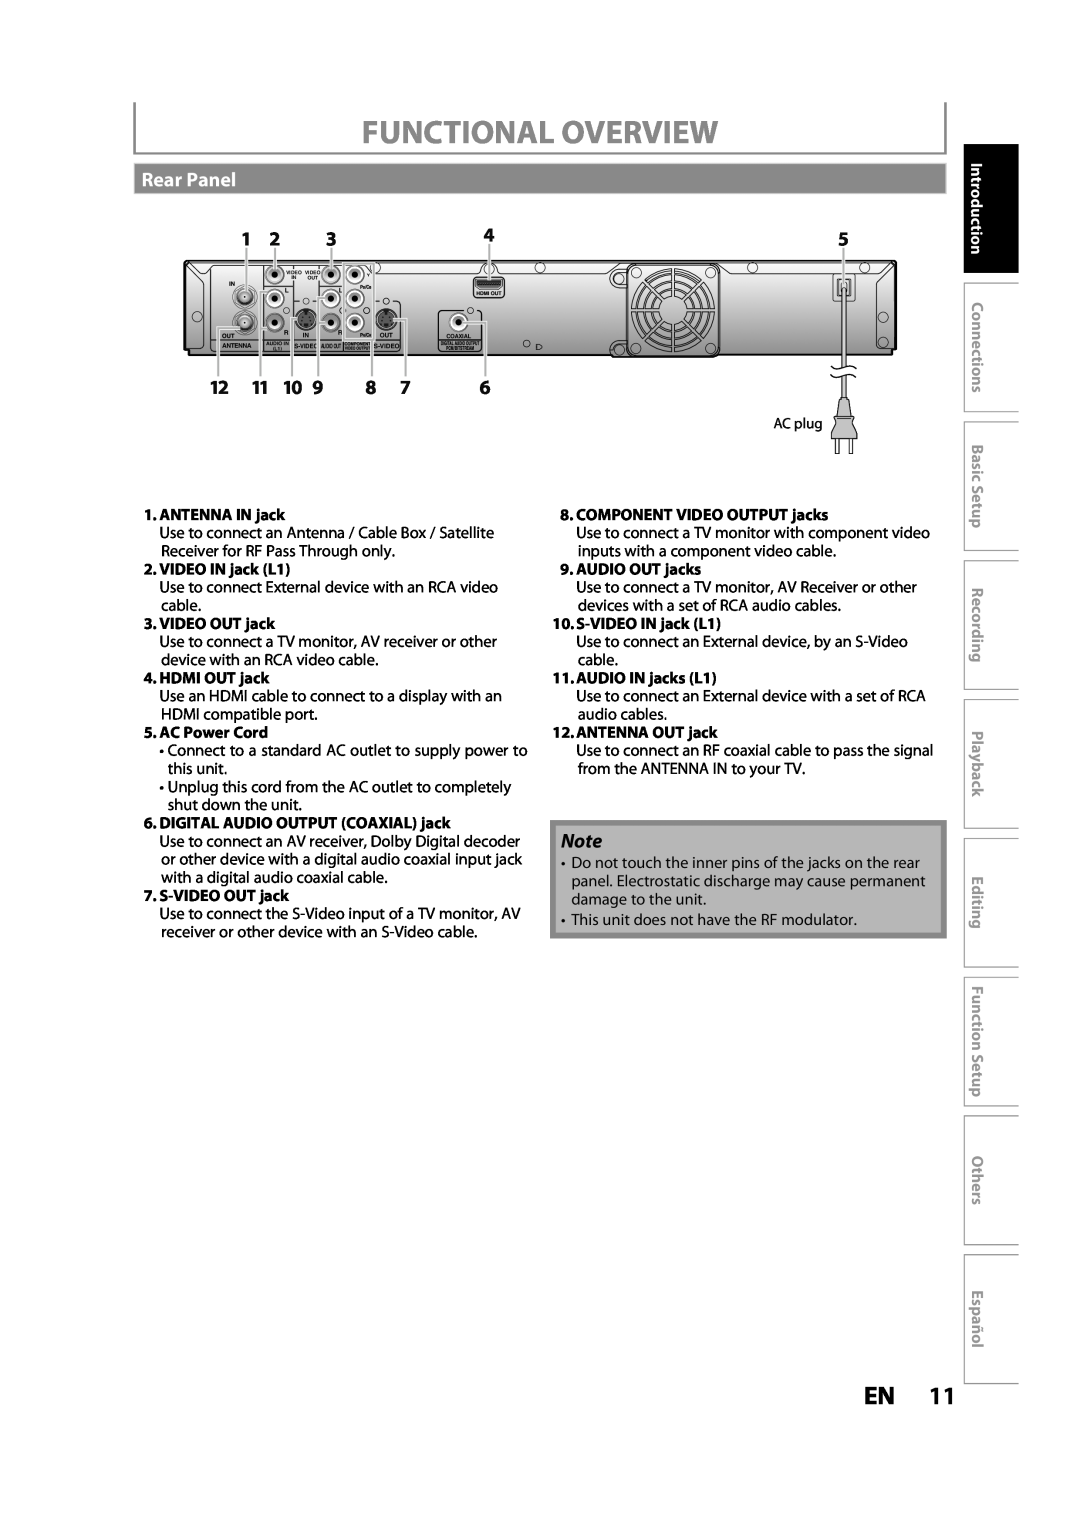 Magnavox MDR533H Functional Overview, Rear Panel, Introduction Connections Basic Setup, ANTENNA IN jack, VIDEO IN jack L1 